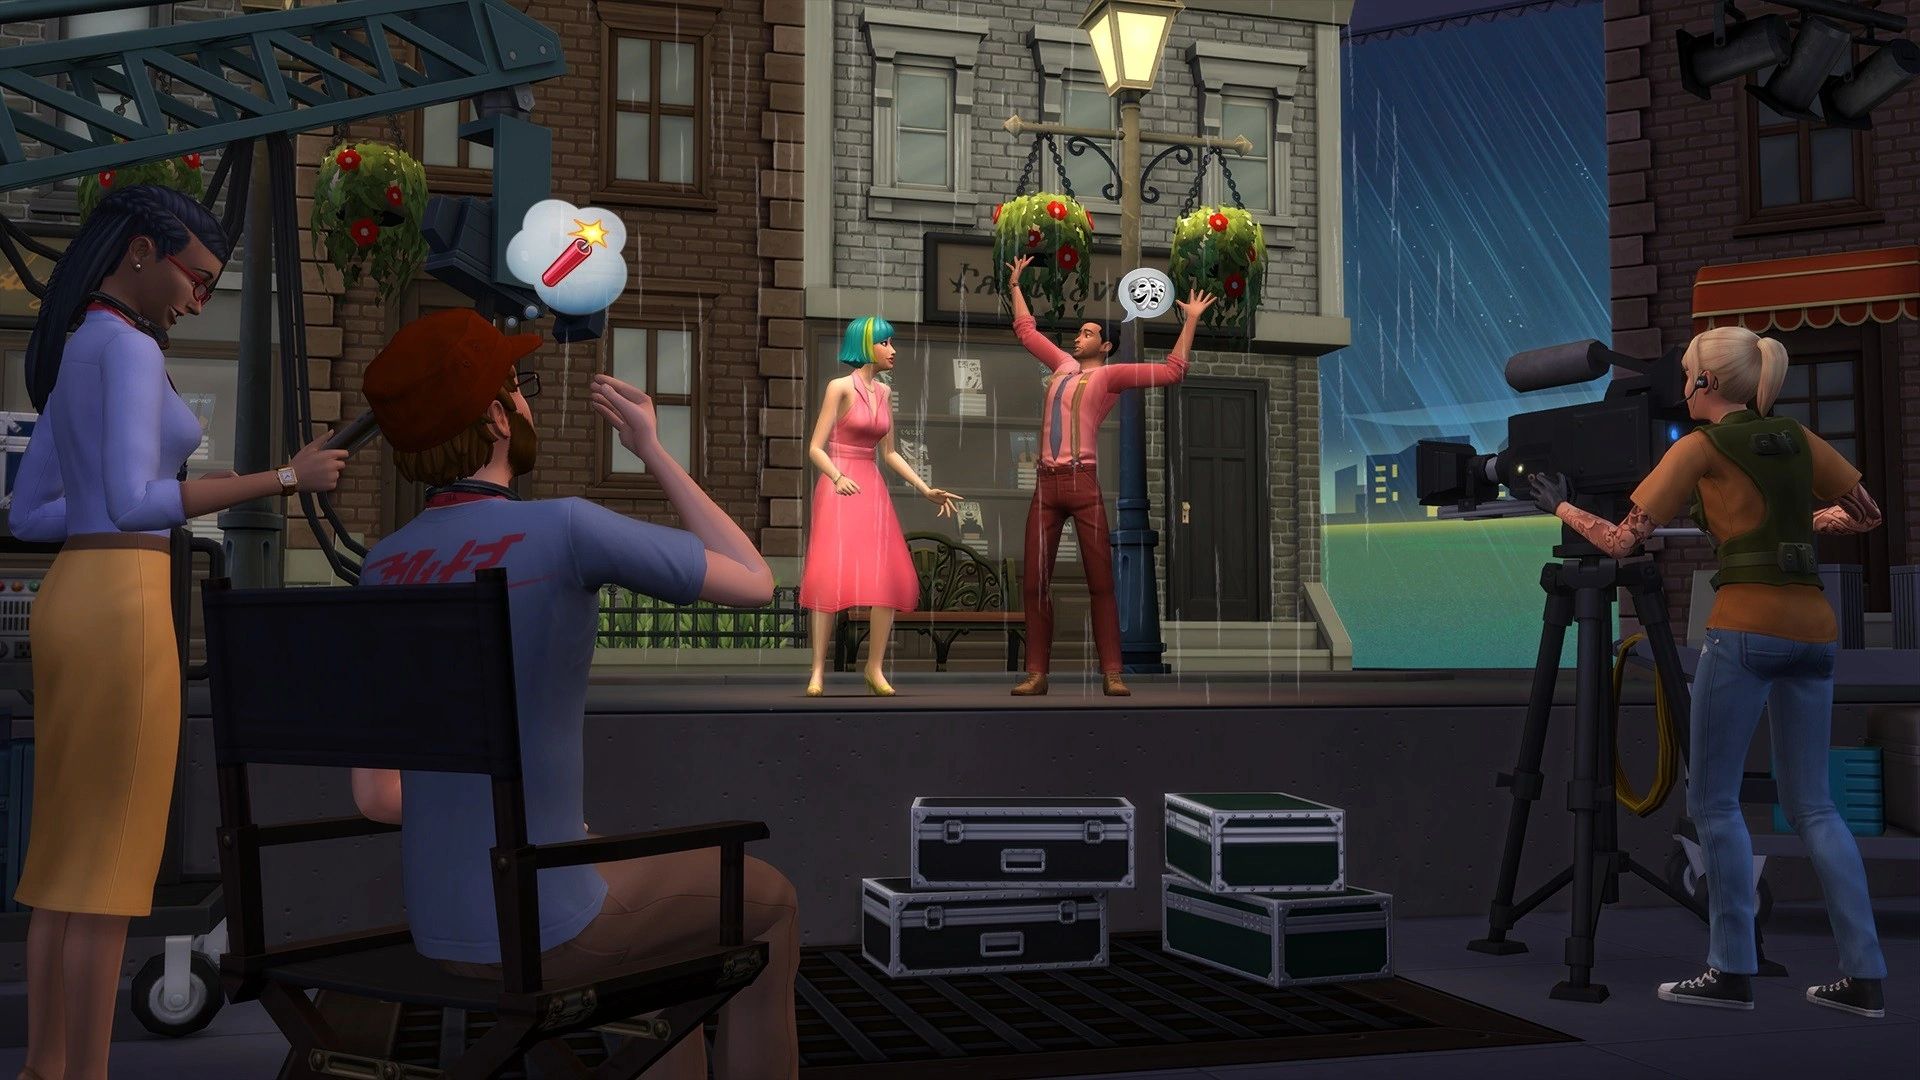 Screenshot of The Sims 4, with two actors on setbeing filmed.